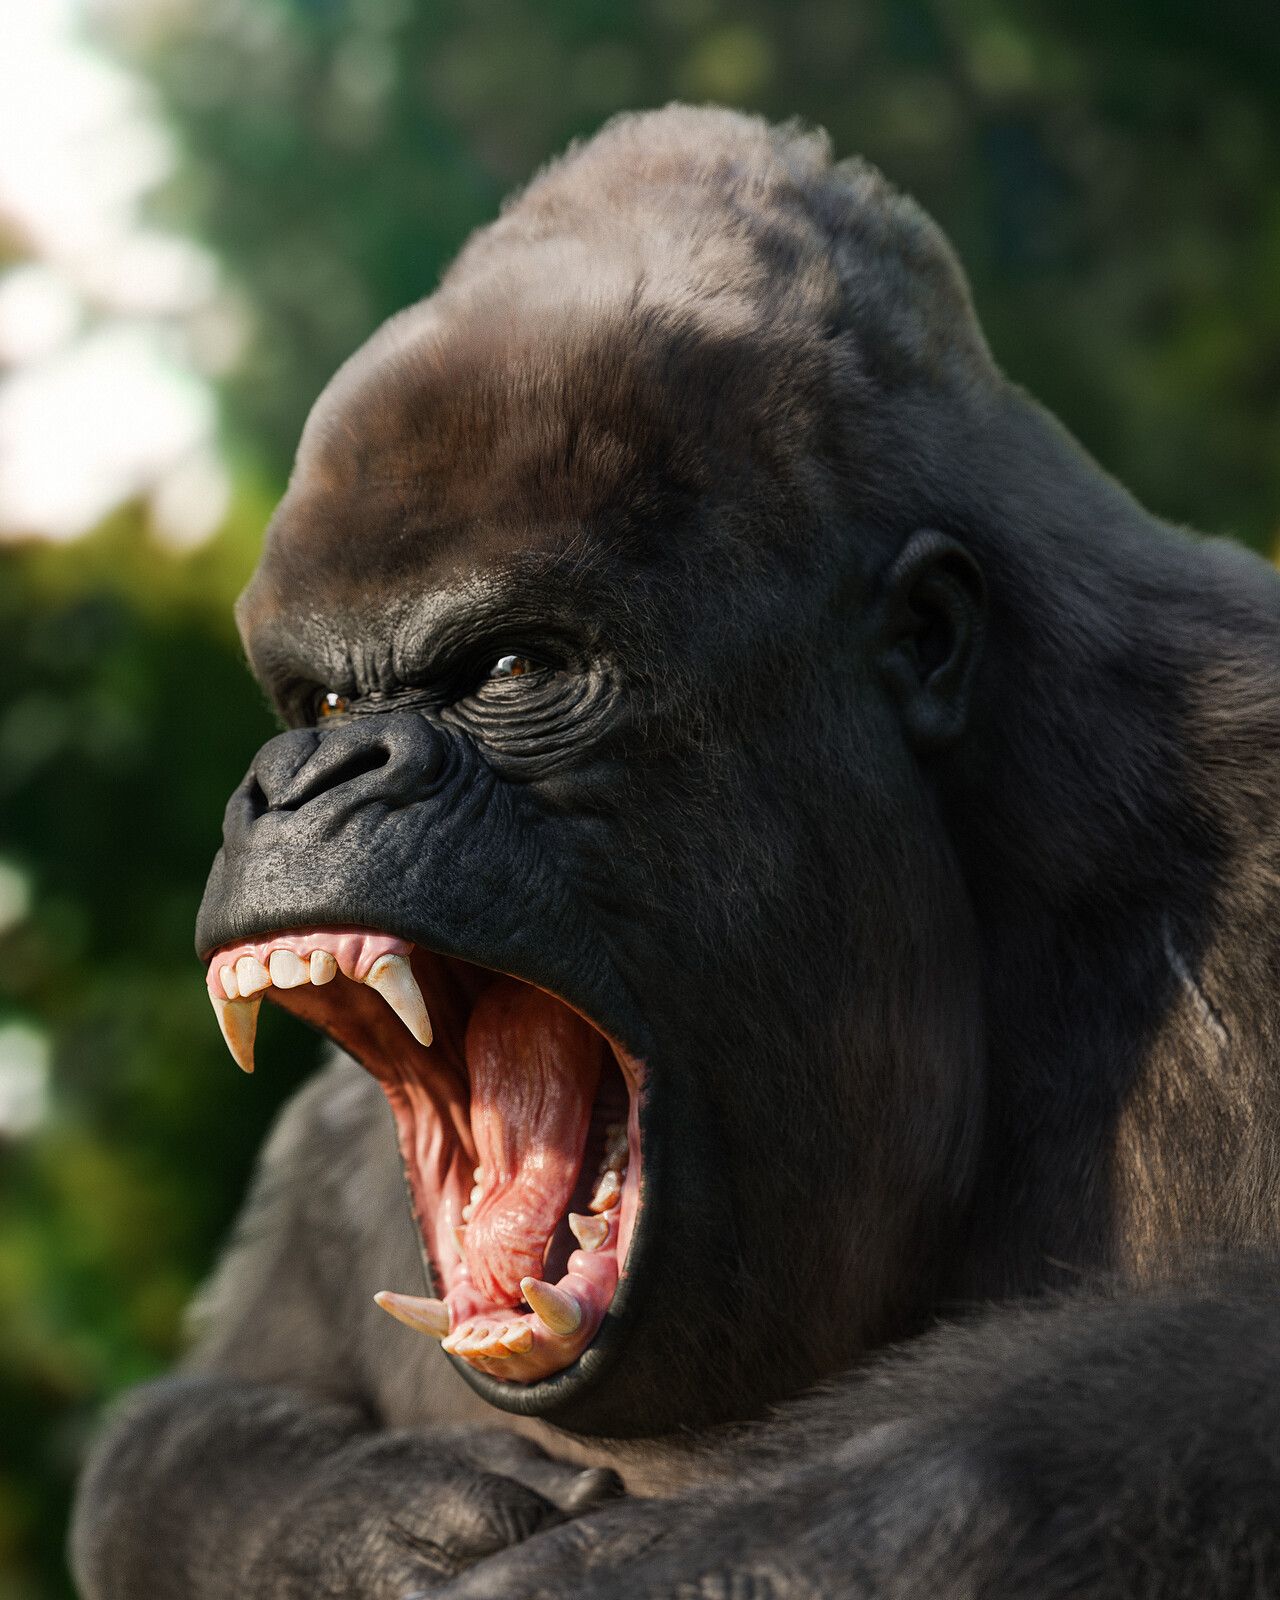 Angry Gorilla, Manuel D'Onofrio